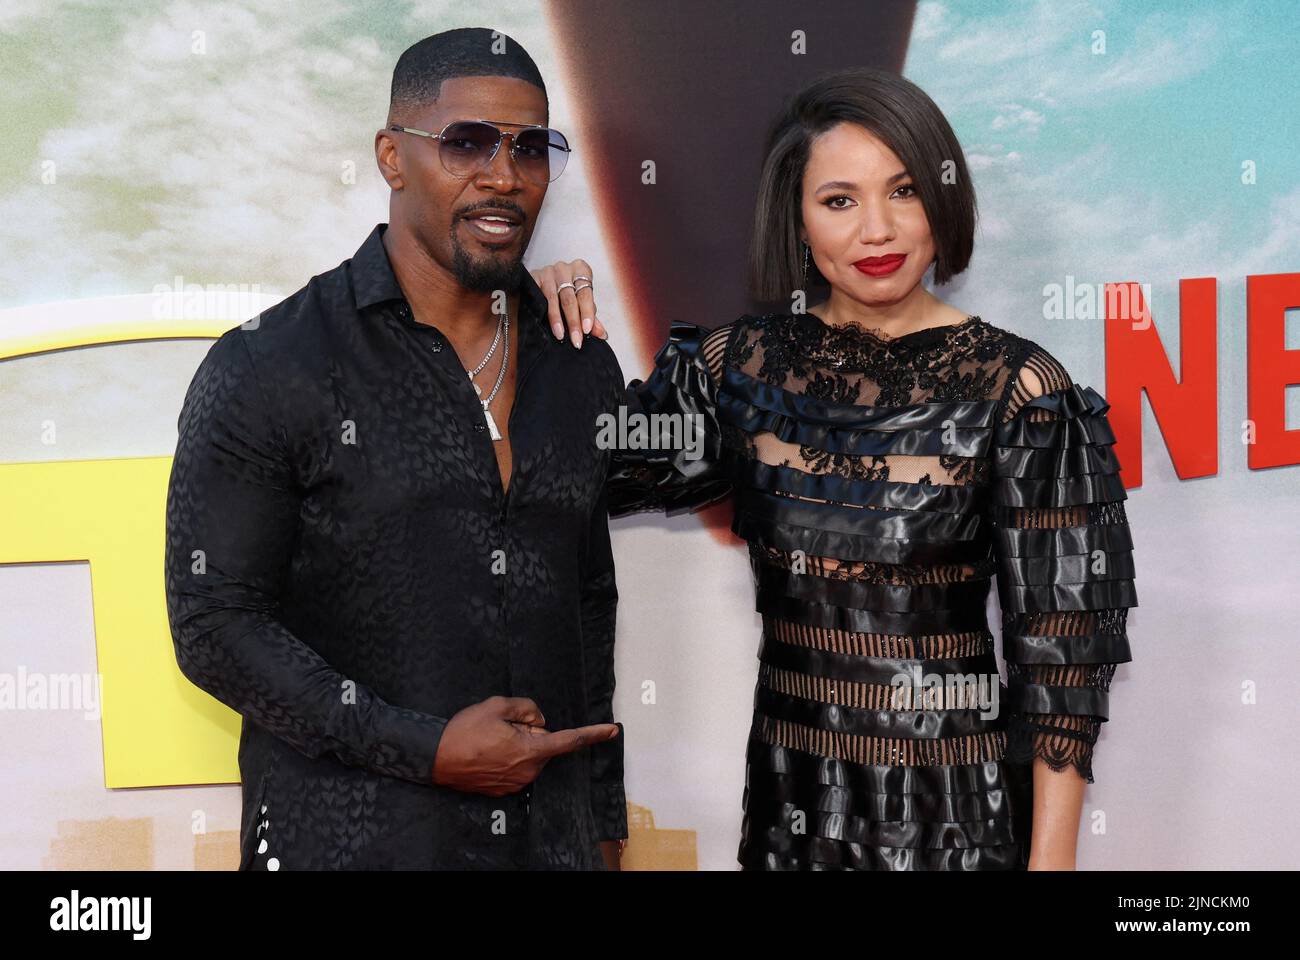 Cast member Jamie Foxx poses with actor Jurnee Smollett during the premiere for the film Day Shift in Los Angeles, California, U.S., August 10, 2022. REUTERS/Mario Anzuoni Stock Photo